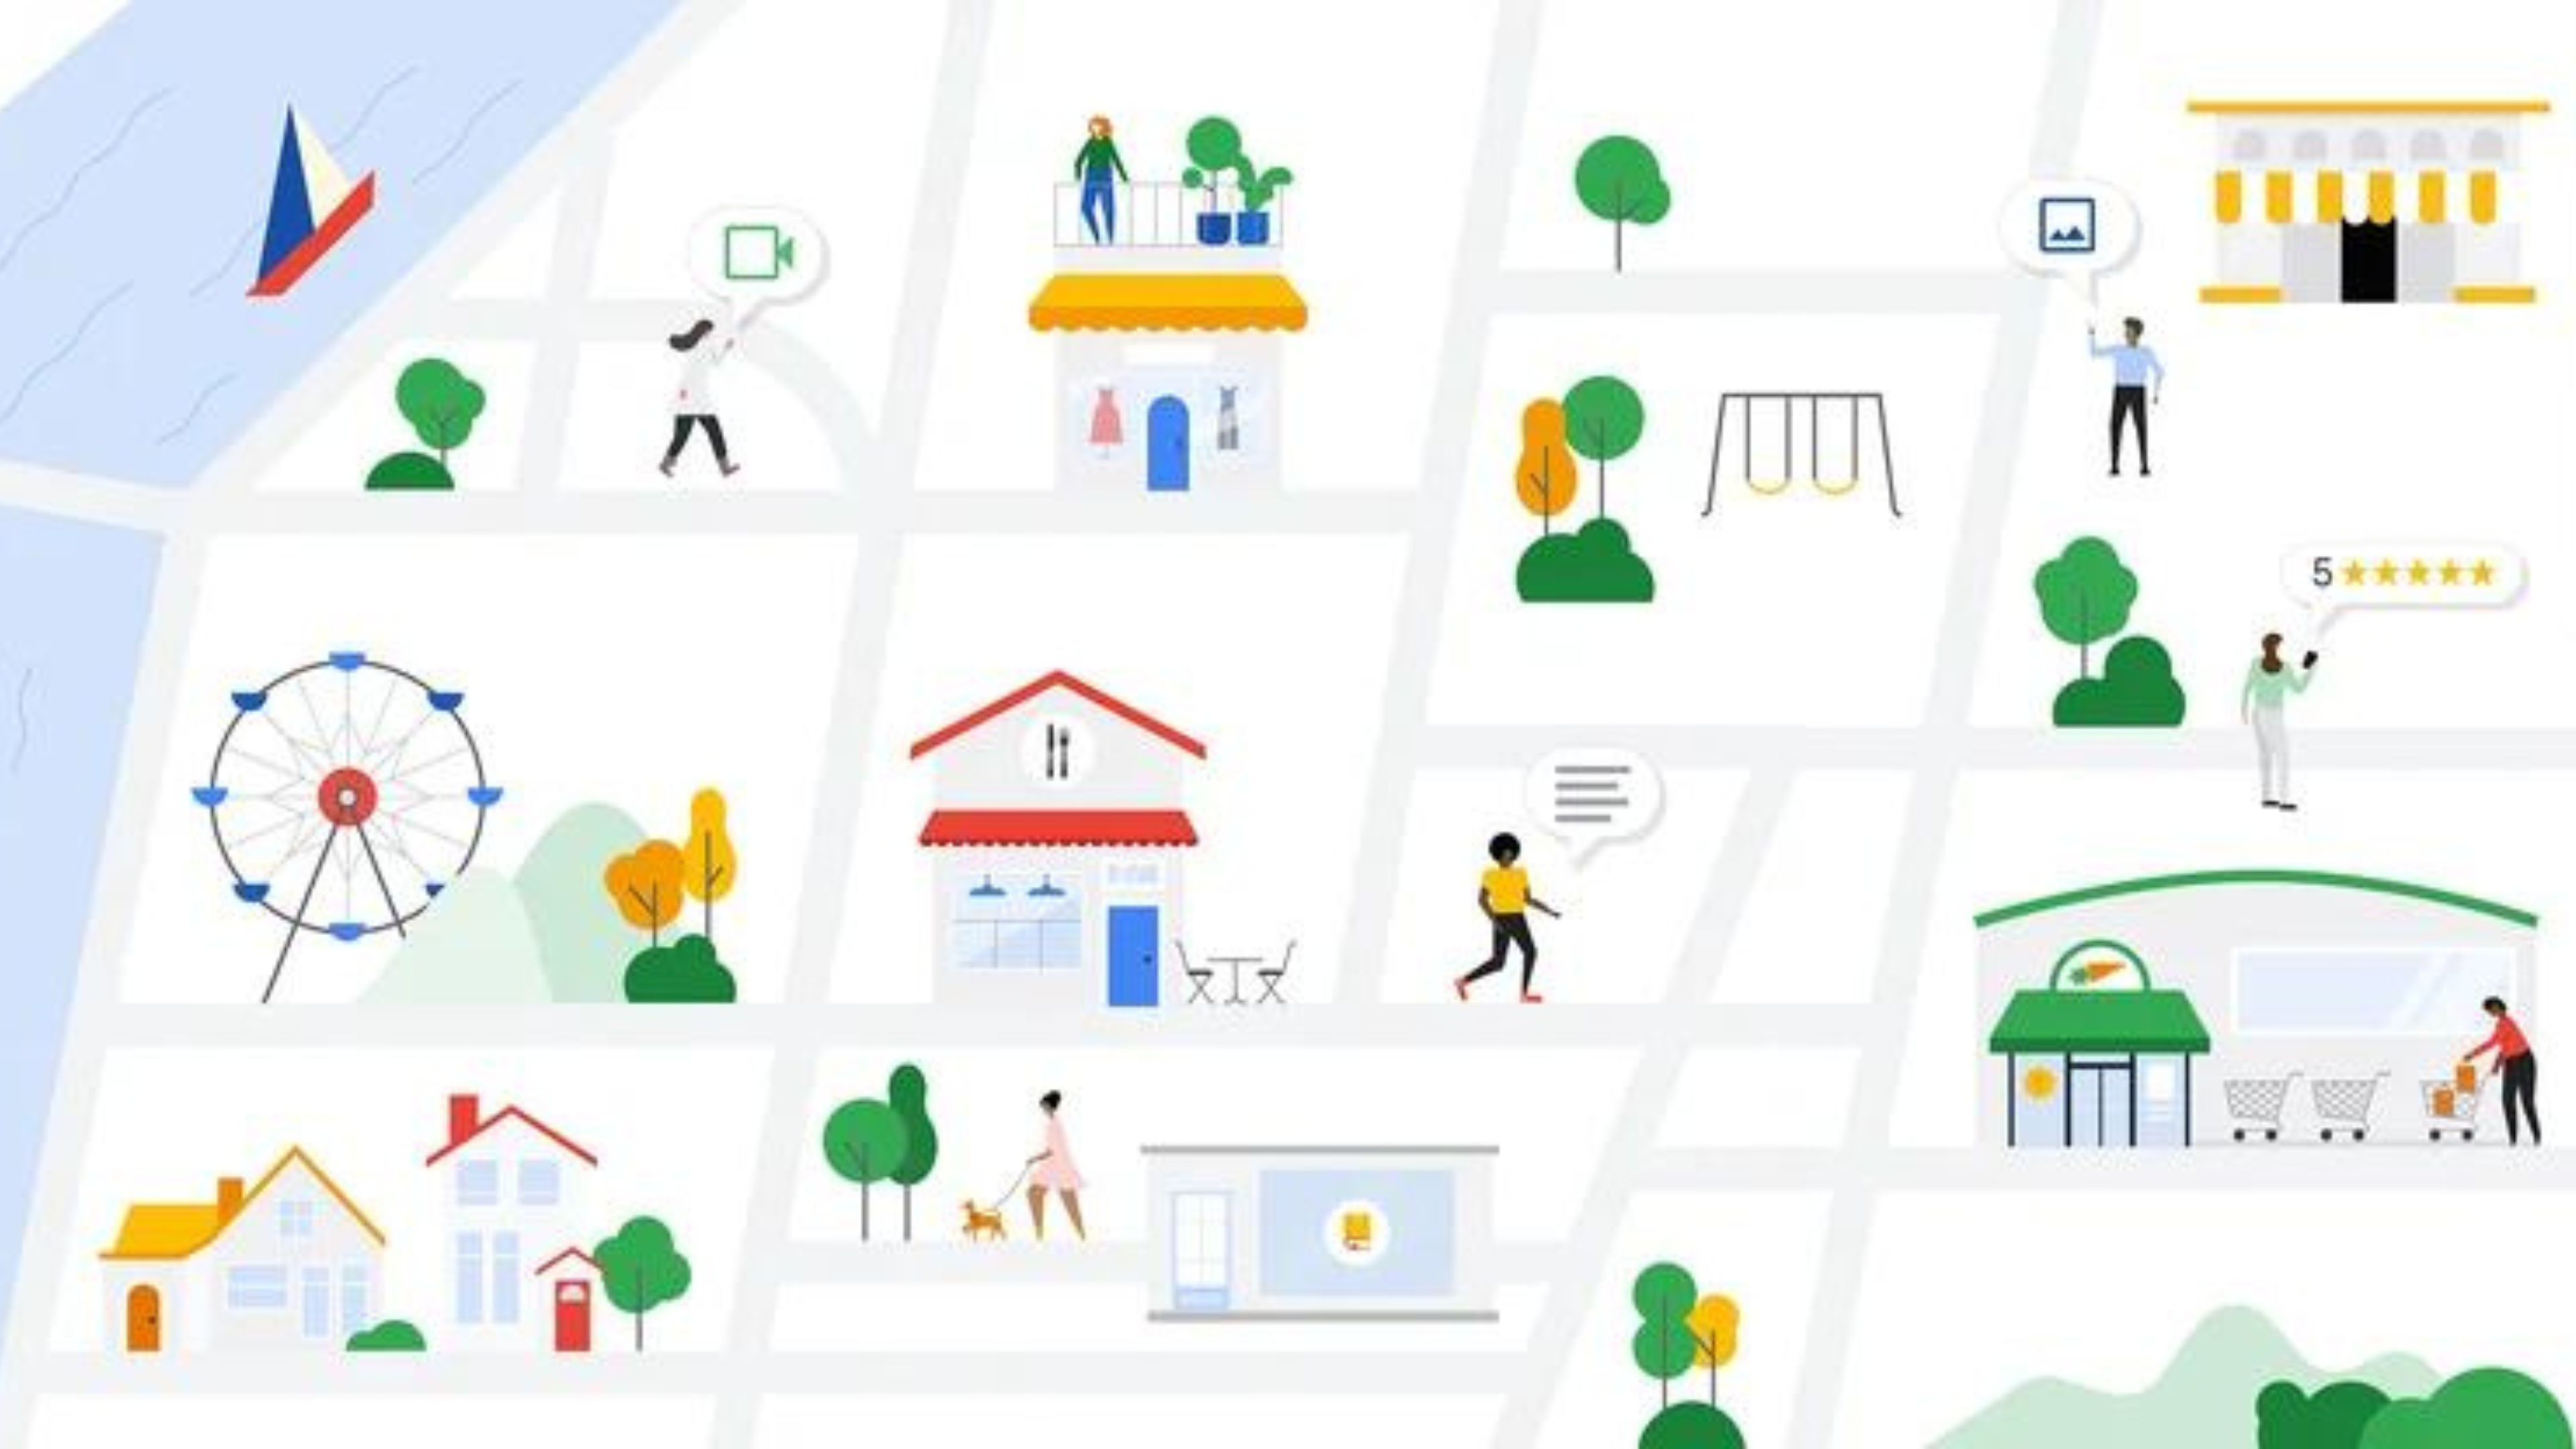 Google Maps showing map of city with contributors chiming in and sharing reviews and images